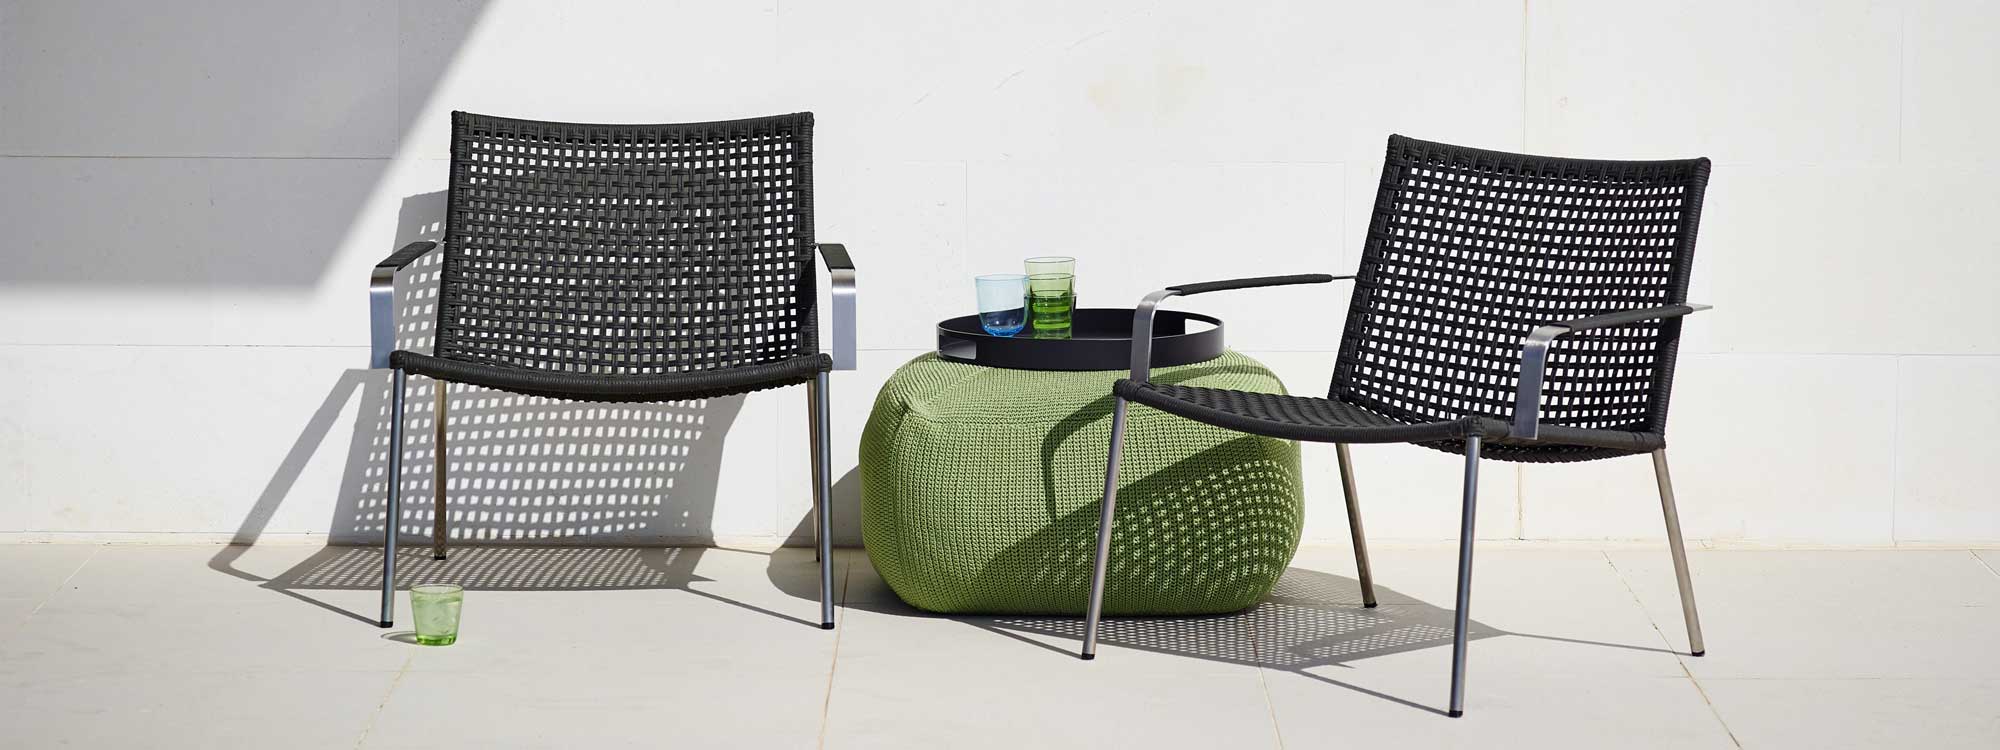 Straw OUTDOOR LOUNGE CHAIR Is A Garden EASY CHAIR In HIGH QUALITY Outdoor Furniture Materials By Cane-line DESIGNER EXTERIOR FURNITURE